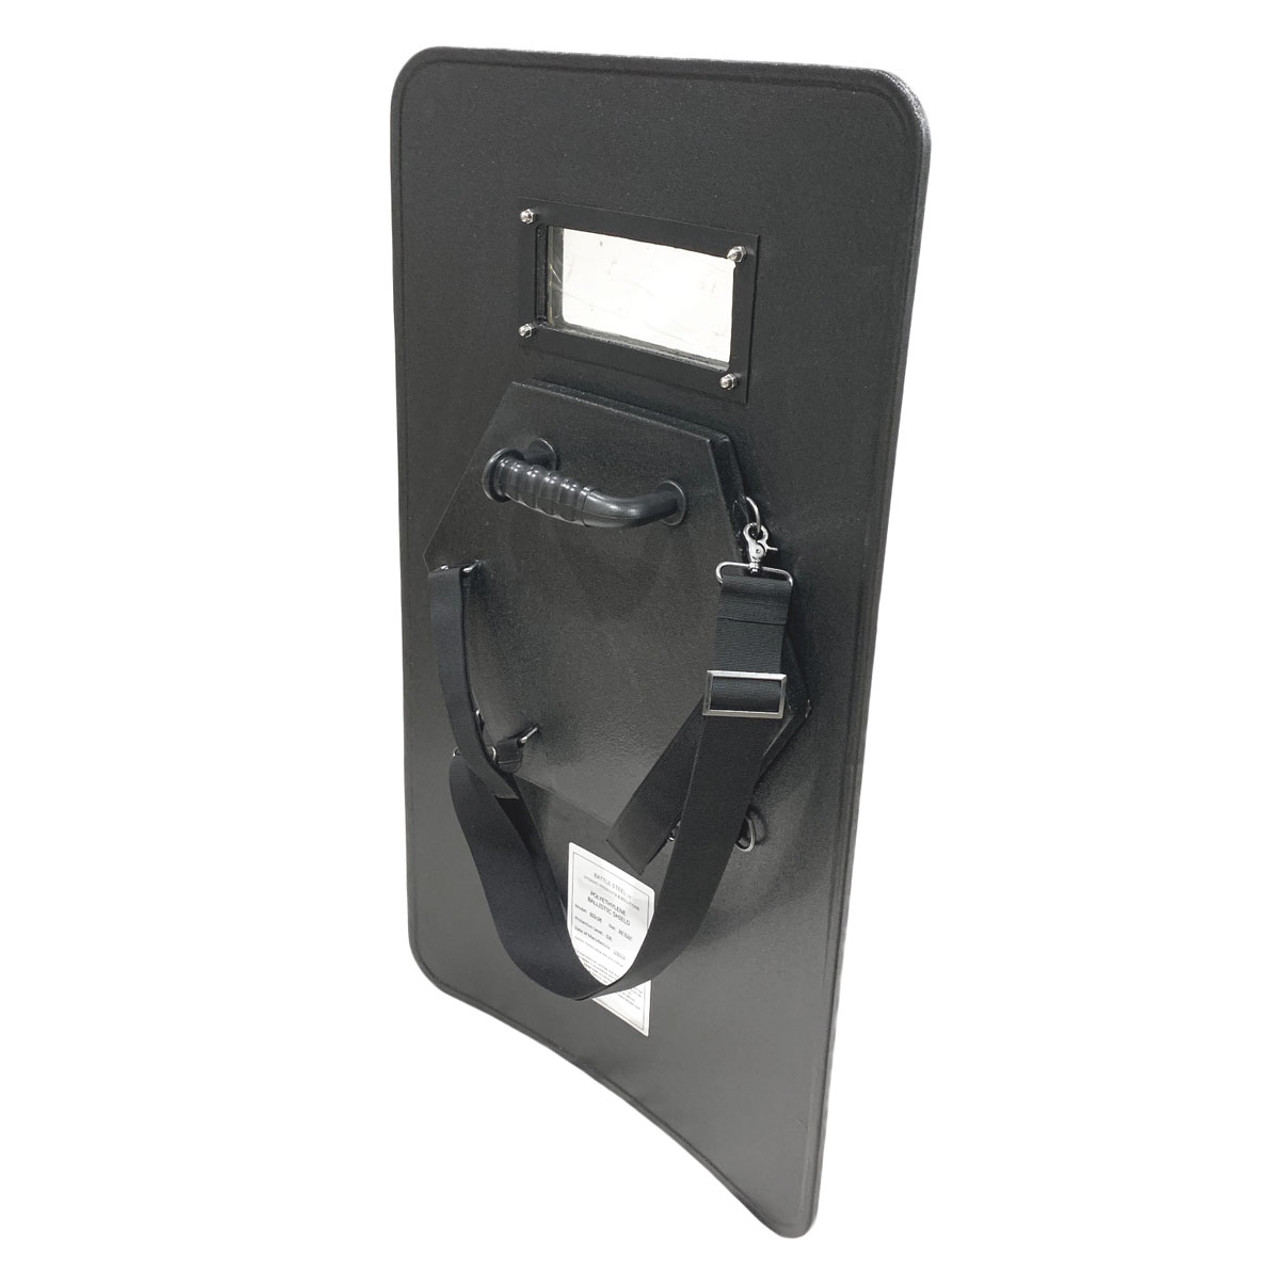 Ballistic Shields Special Threat Level 3A+ w/Viewport buy with